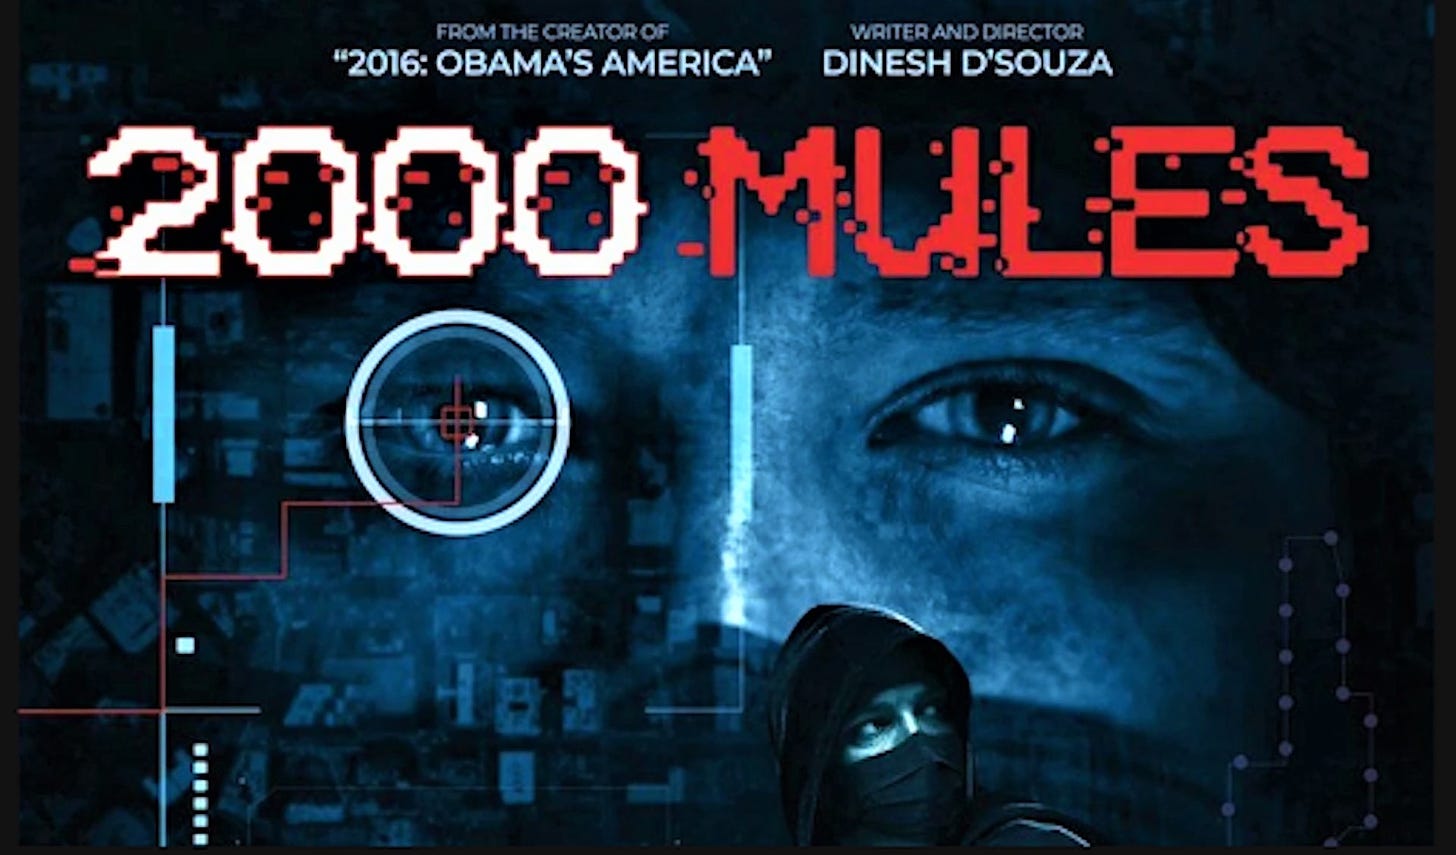 Don't Be a Donkey! 2000 Mules Movie Review |The Queens Village ...